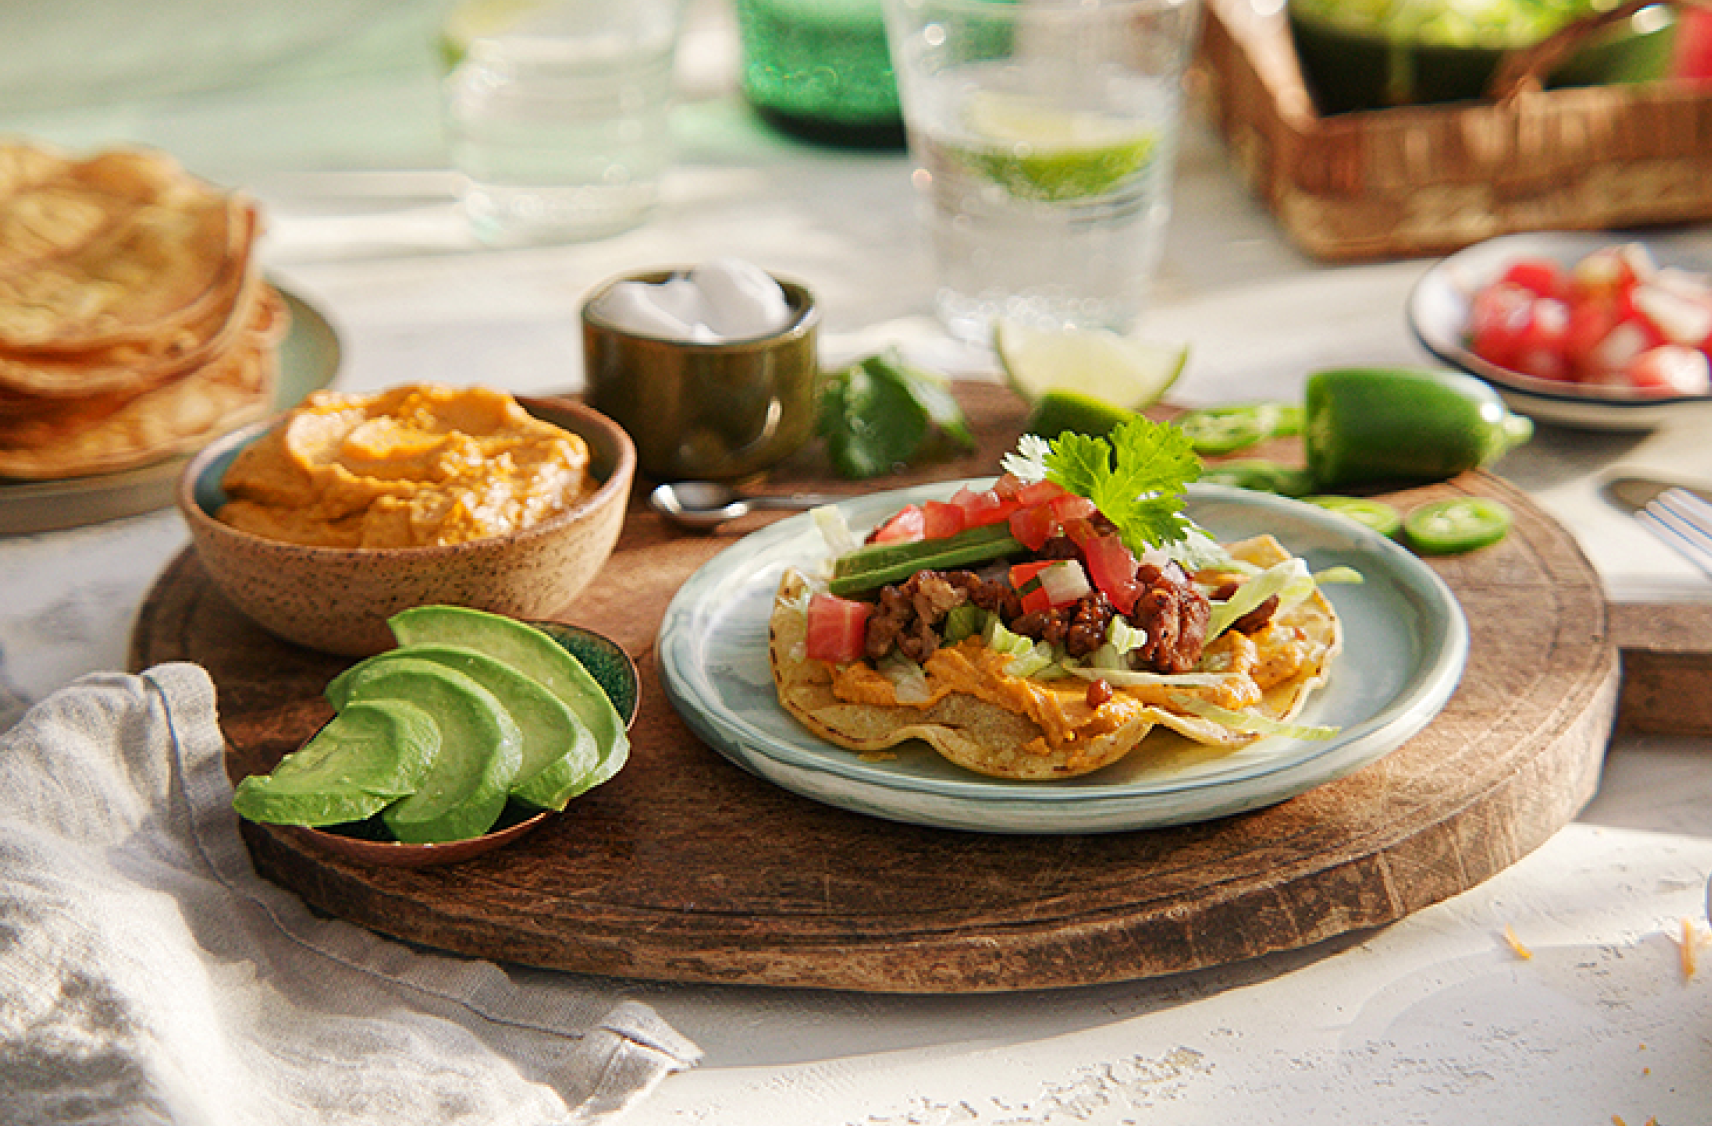 A wooden board with a plate holding a dressed plant based tostado with slises of avocaado and a bowl of plant based dip on the side.